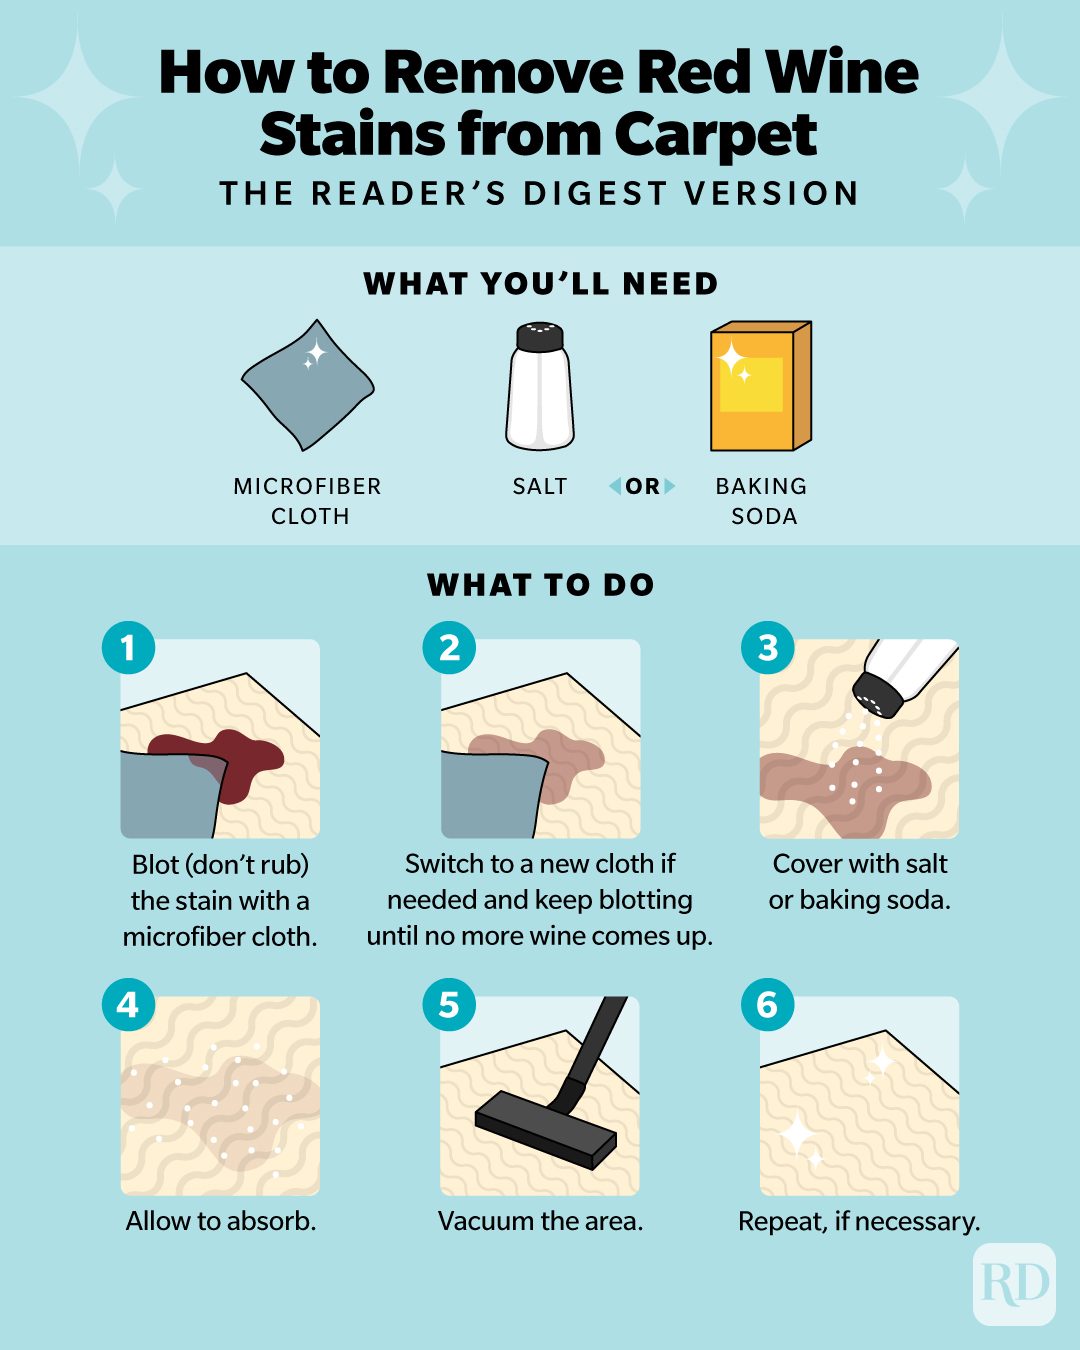 How To Remove Red Wine Stains From Carpet Infographic V2